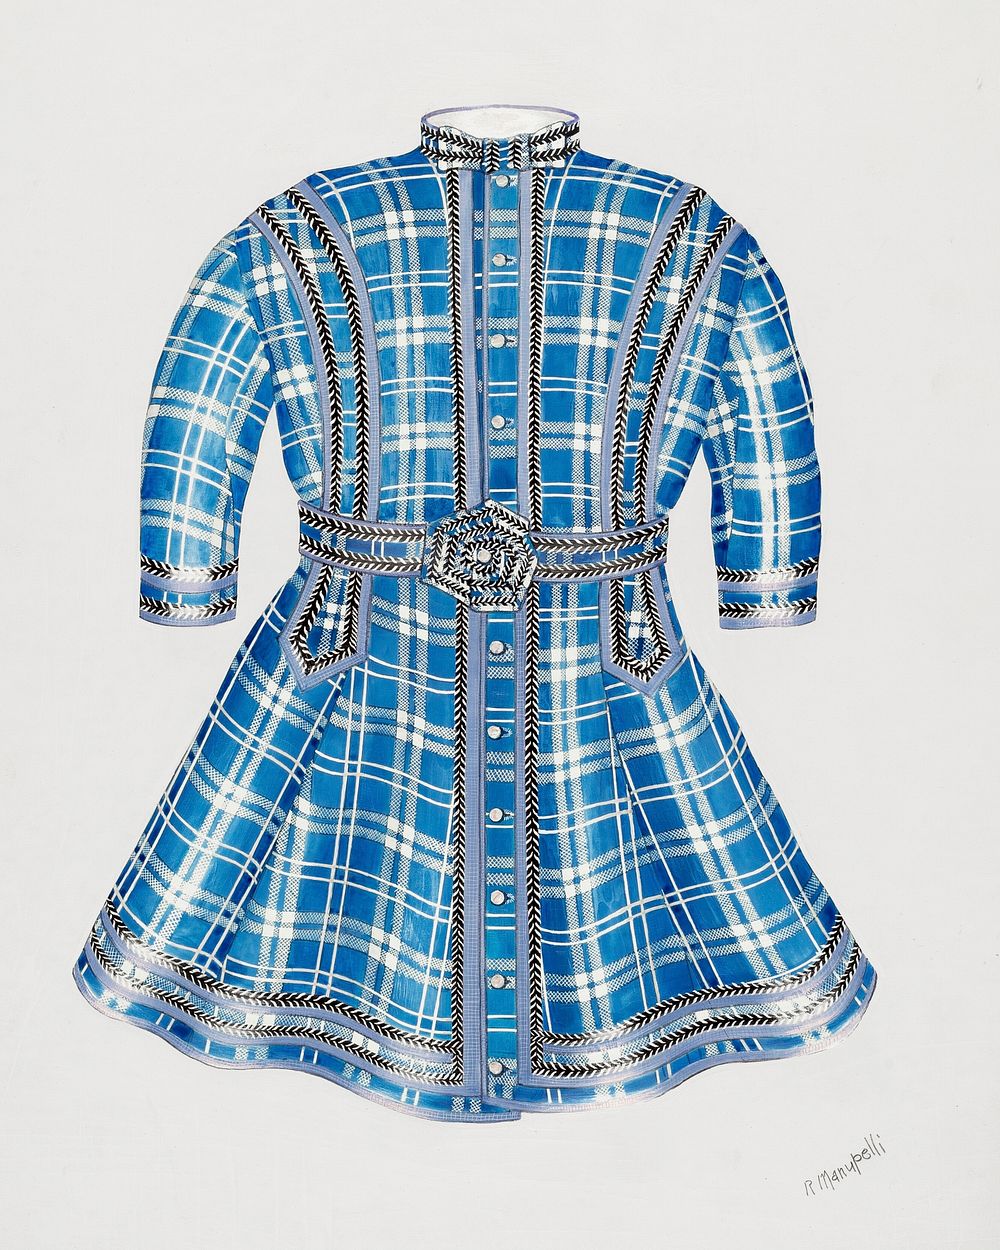 Child's Dress (ca. 1939) by Raymond Manupelli. Original from The National Gallery of Art. Digitally enhanced by rawpixel.